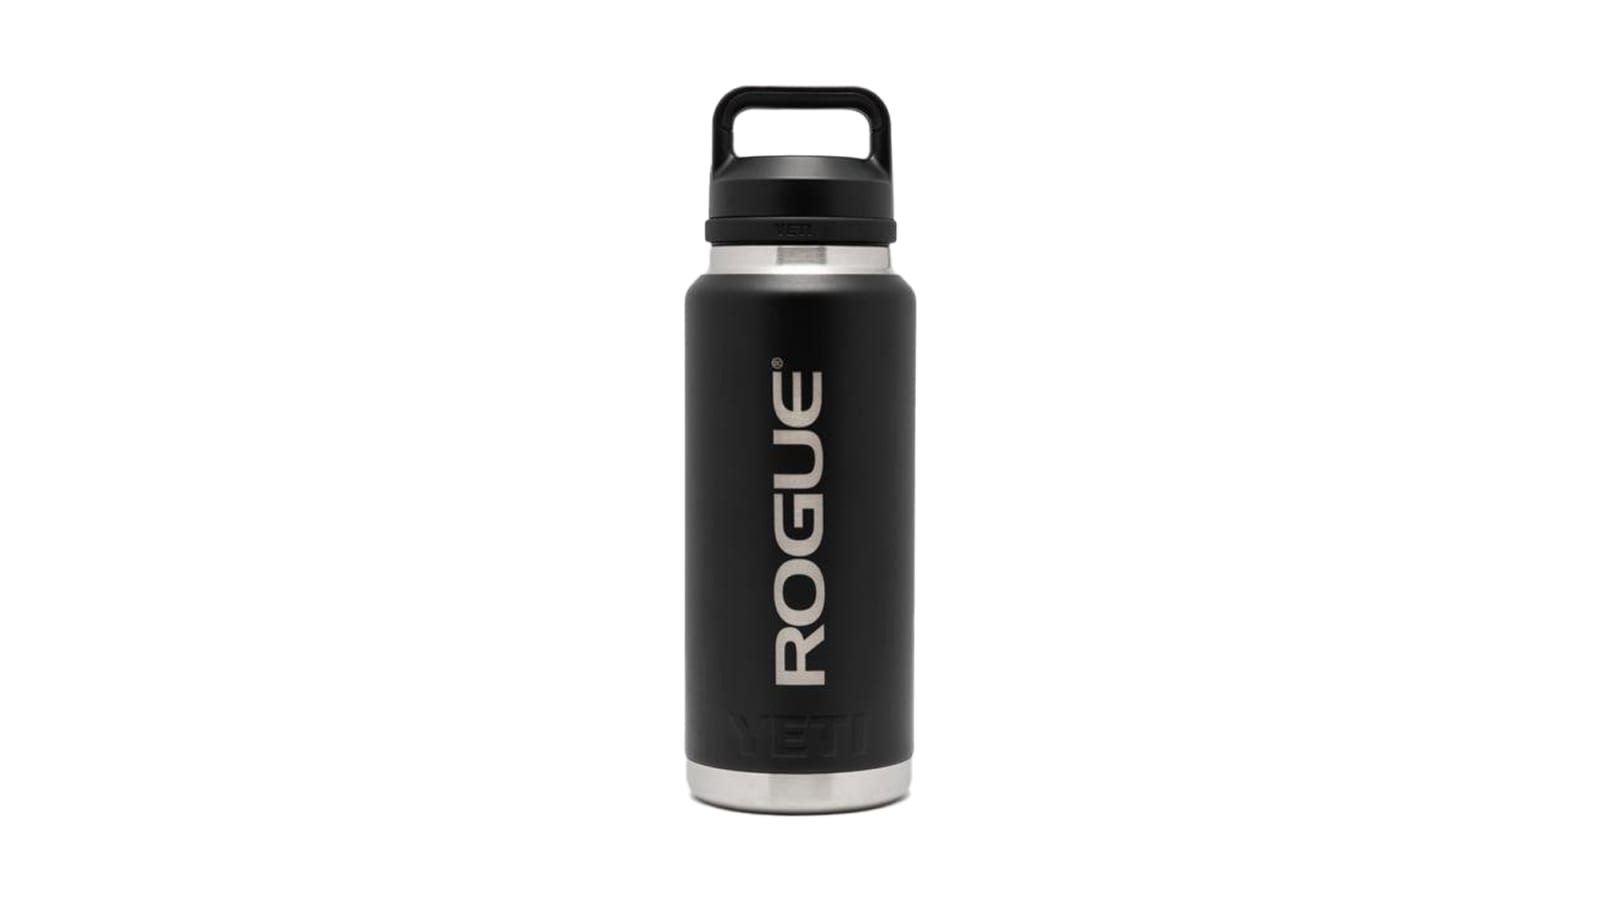 https://assets.roguefitness.com/f_auto,q_auto,c_limit,w_1600,b_rgb:ffffff/catalog/Gear%20and%20Accessories/Accessories/Shakers%20and%20Bottles/YT0052/YT0052-H_jpclzb.png